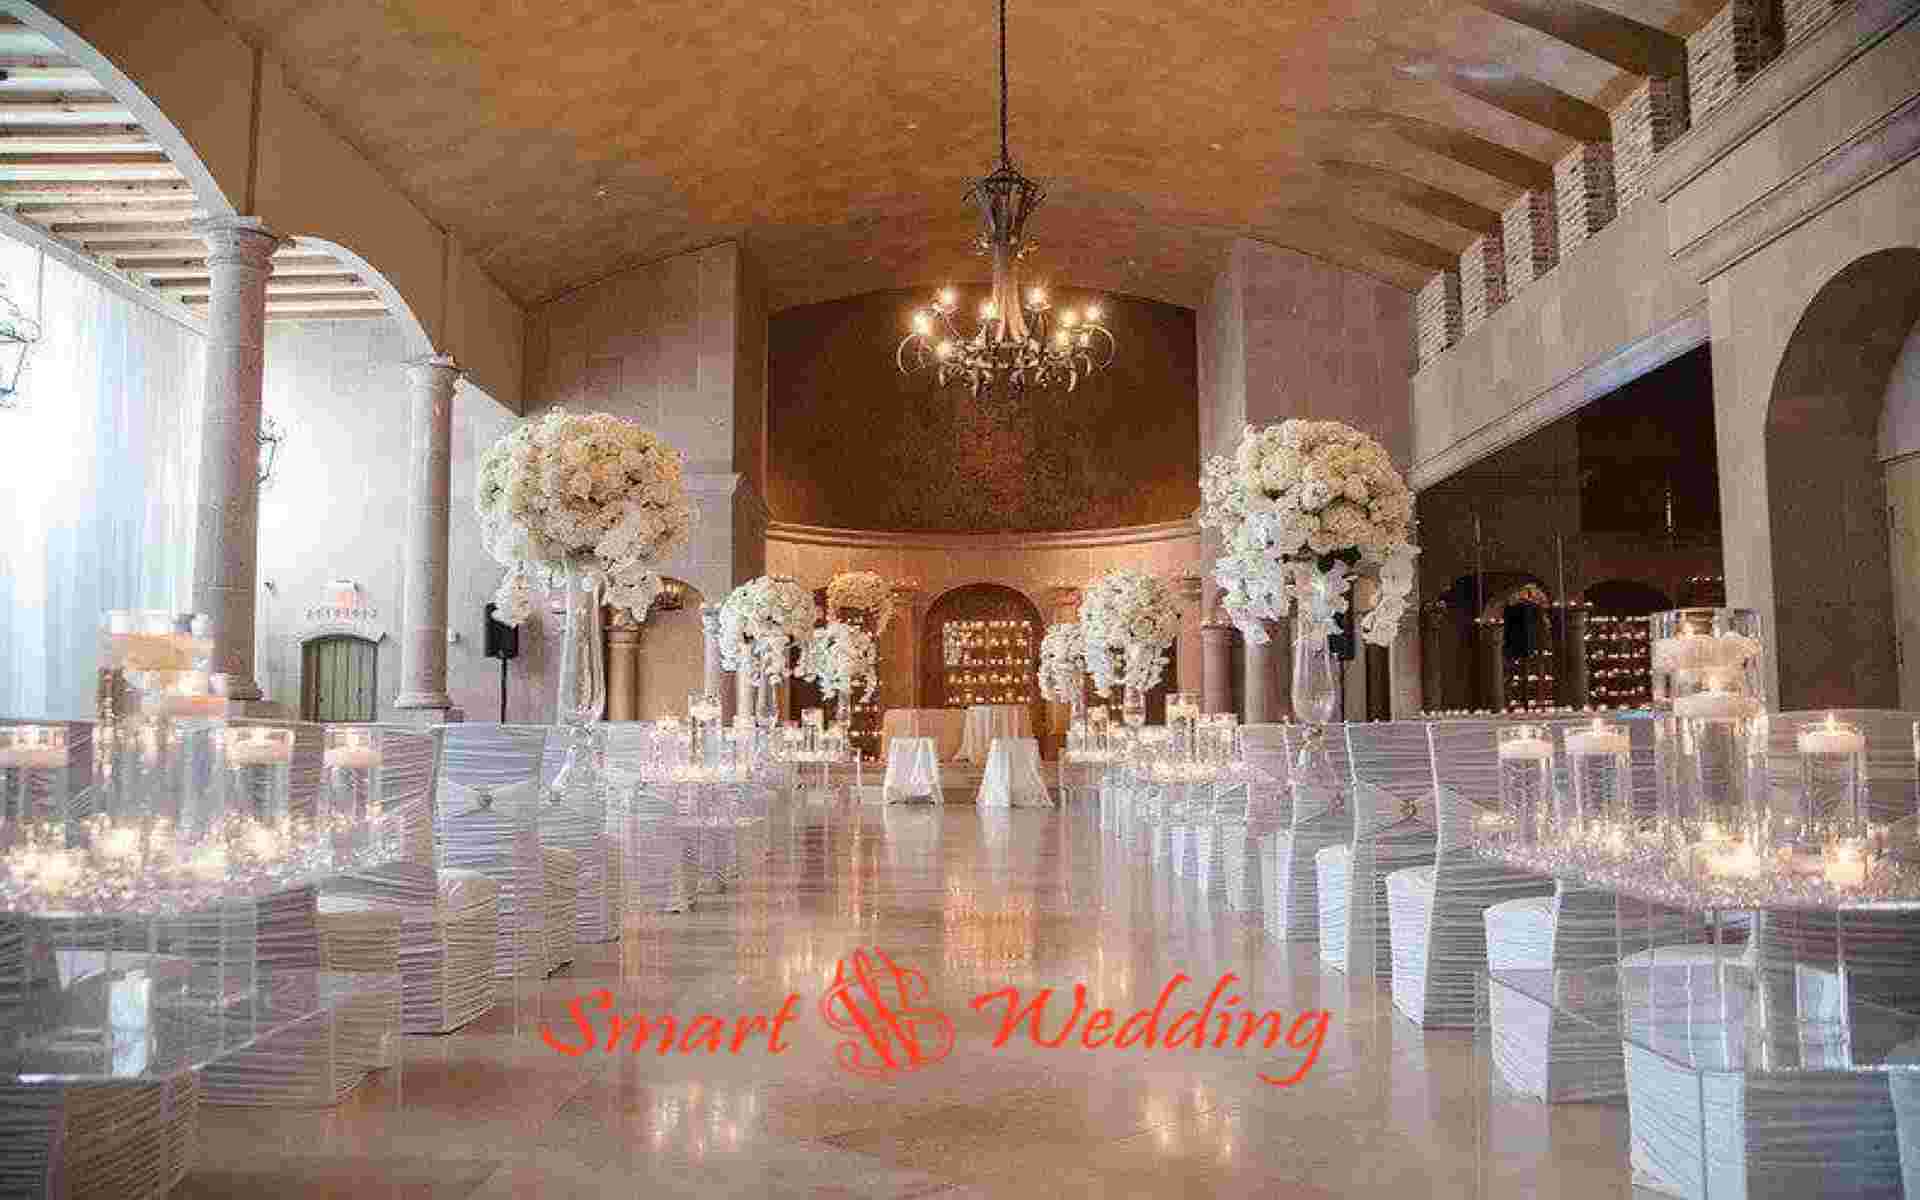 How To Find An Affordable Wedding Venue Of Your Dreams - Smart Wedding